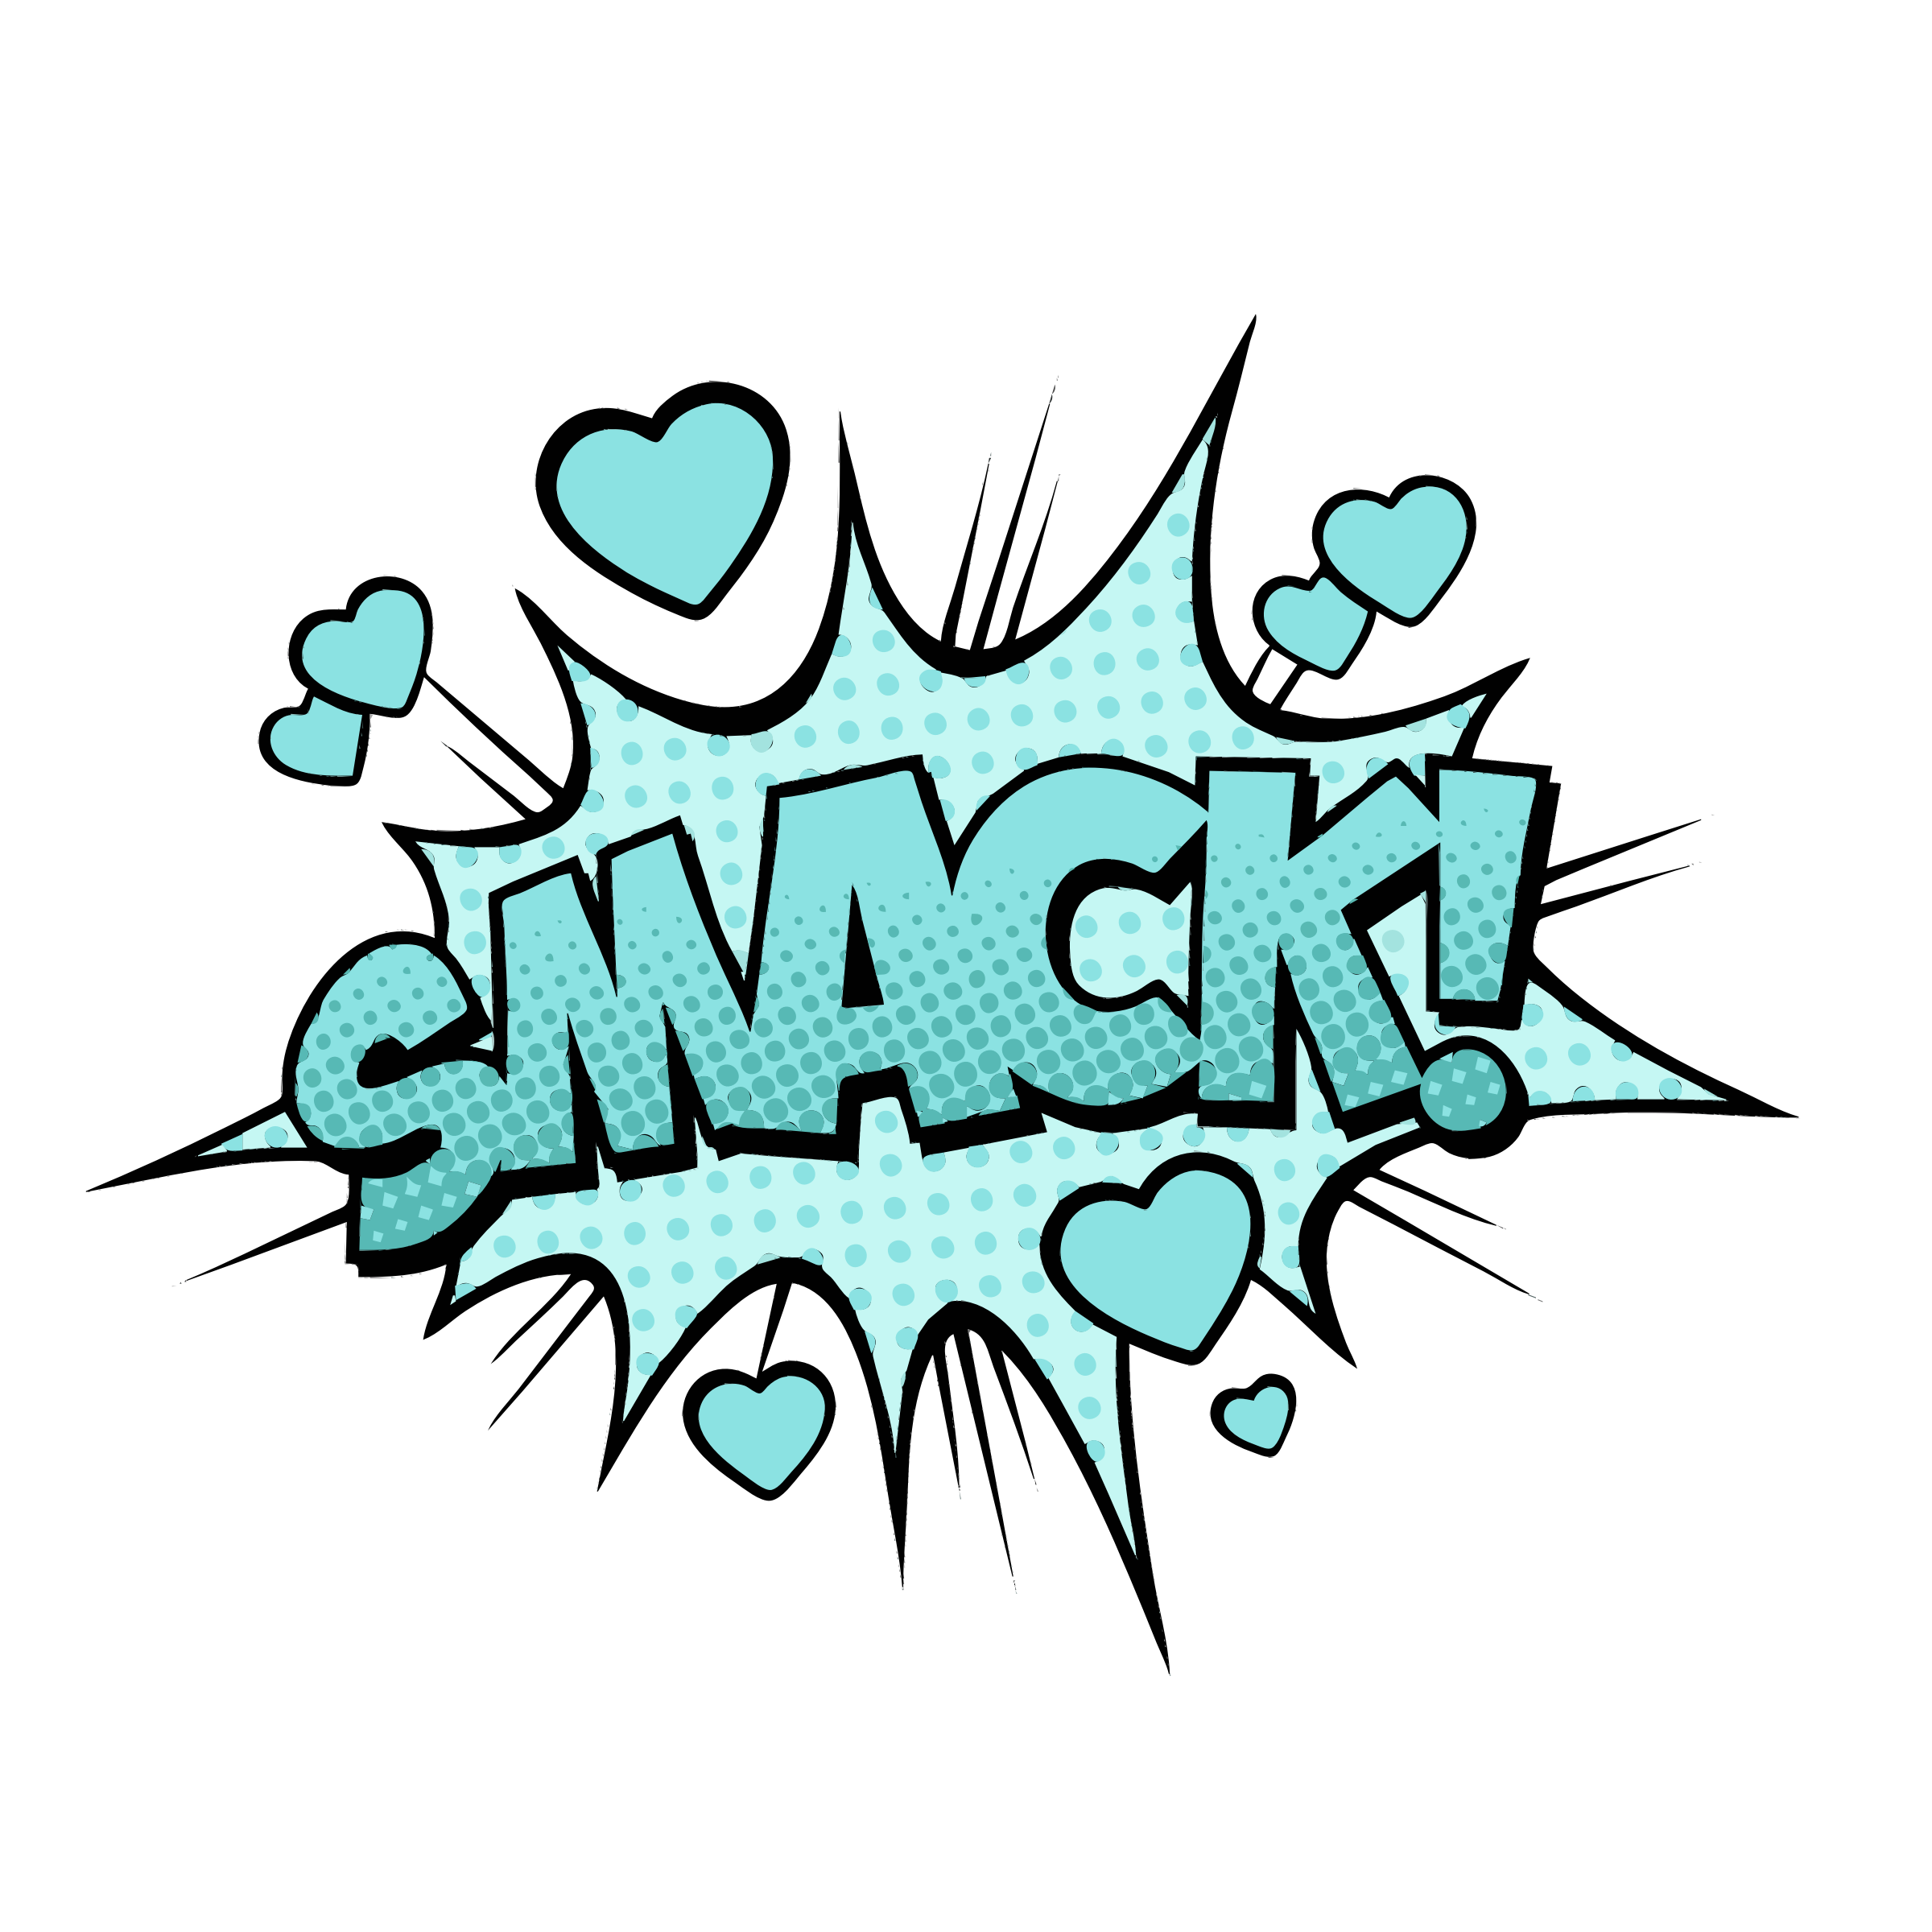 Clip Arts Related To : clipart smack. 